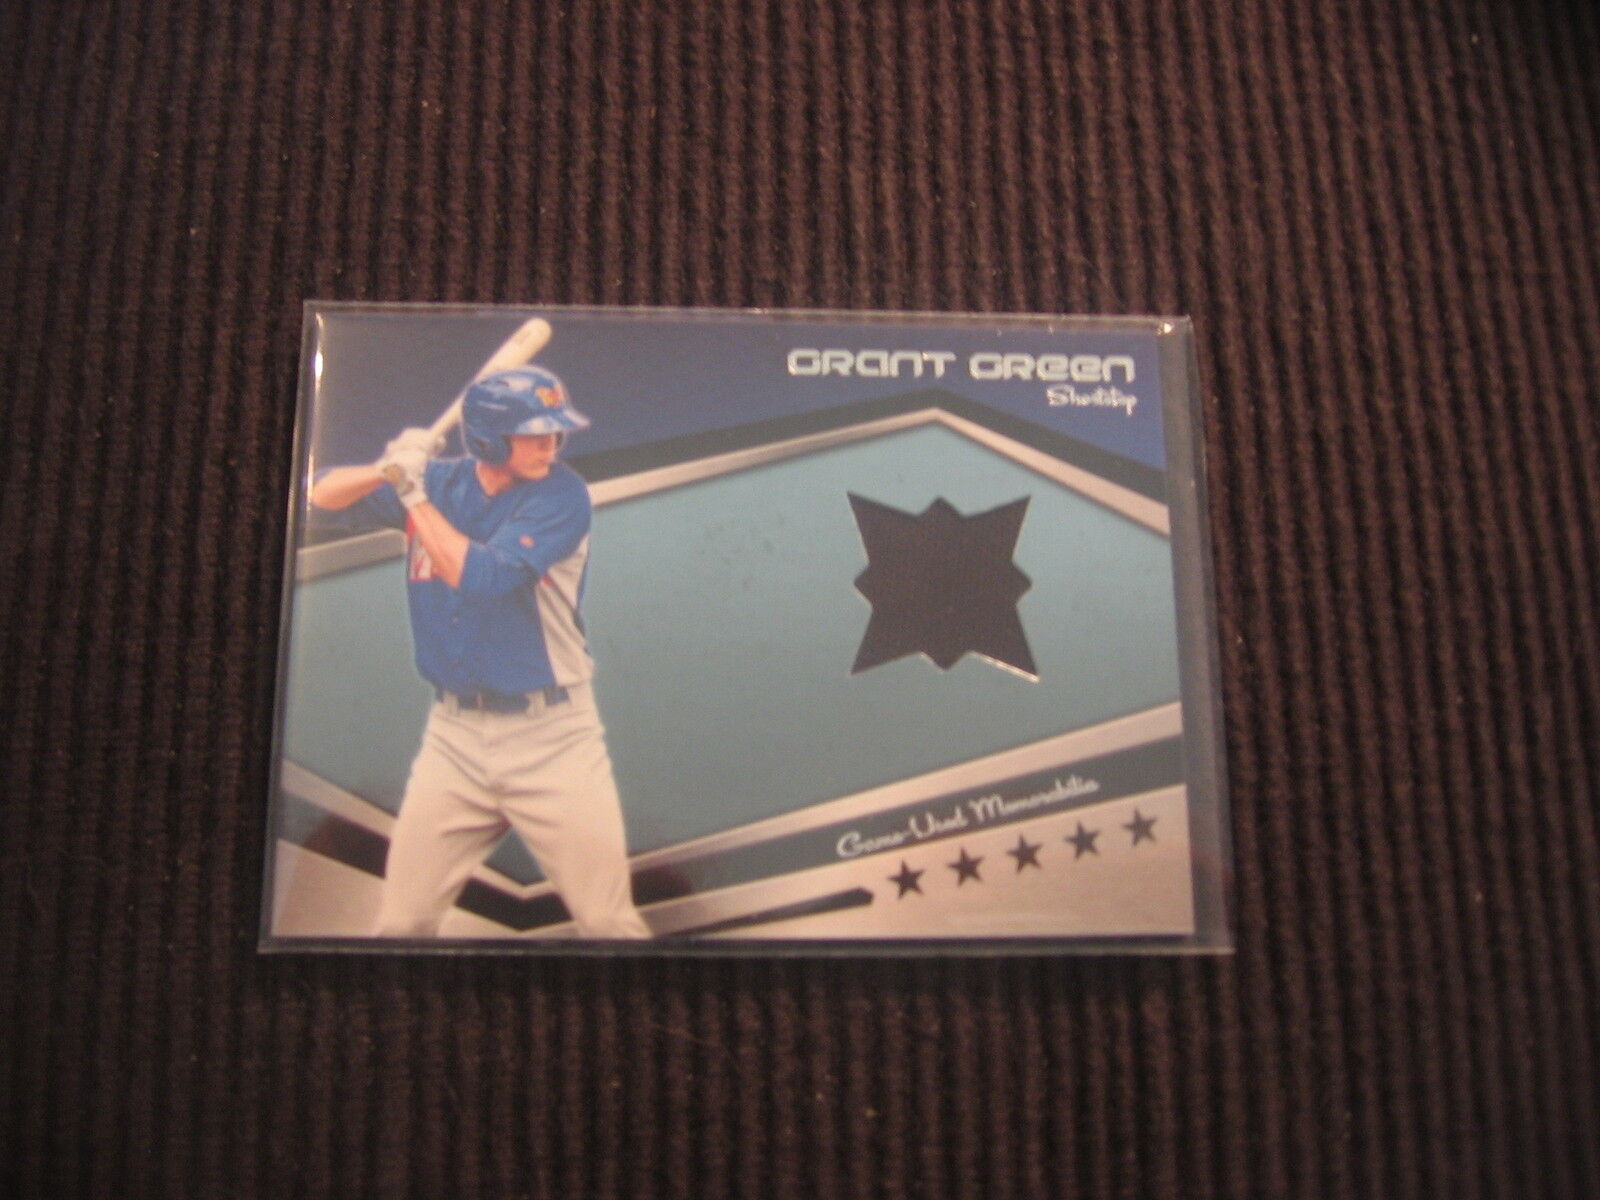 2012 TOPPS PRO DEBUT GRANT GREEN GAME USED JERSEY *BLUE CUT*  MIDLAND ROCKHOUNDS